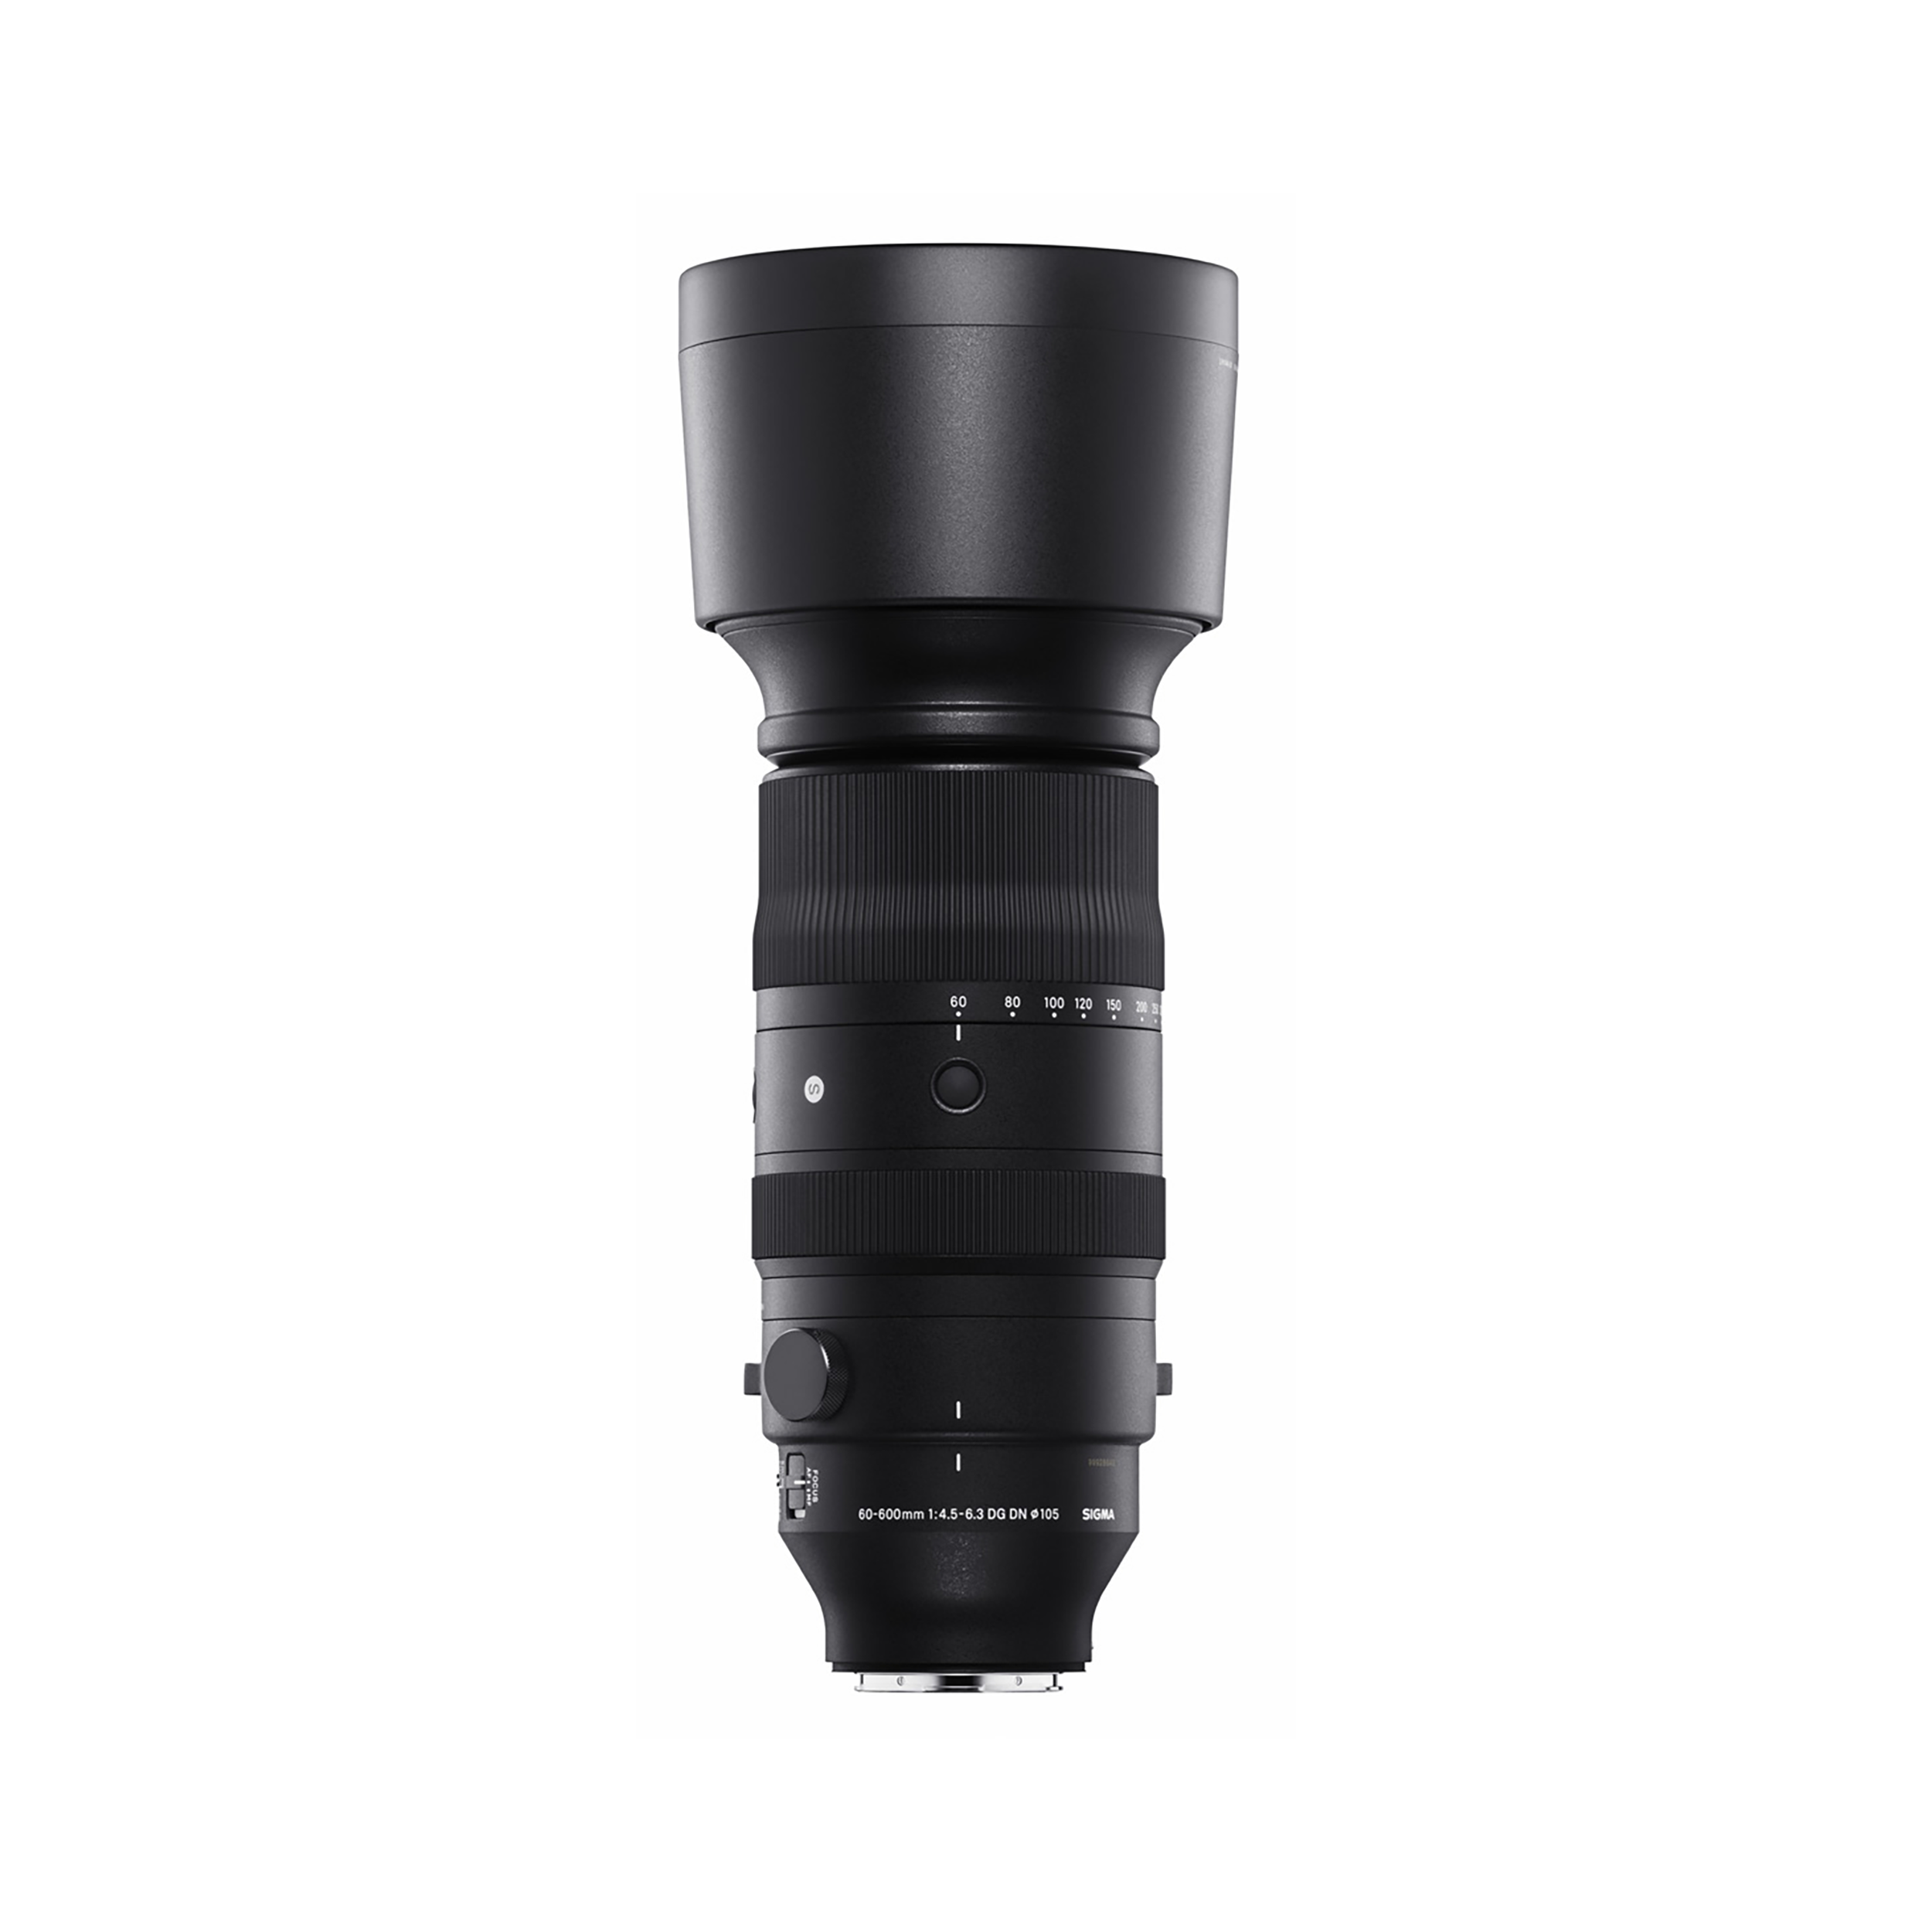 Sigma 60-600mm F4.5-6.3 DG DN OS Sports Lens for L Mount